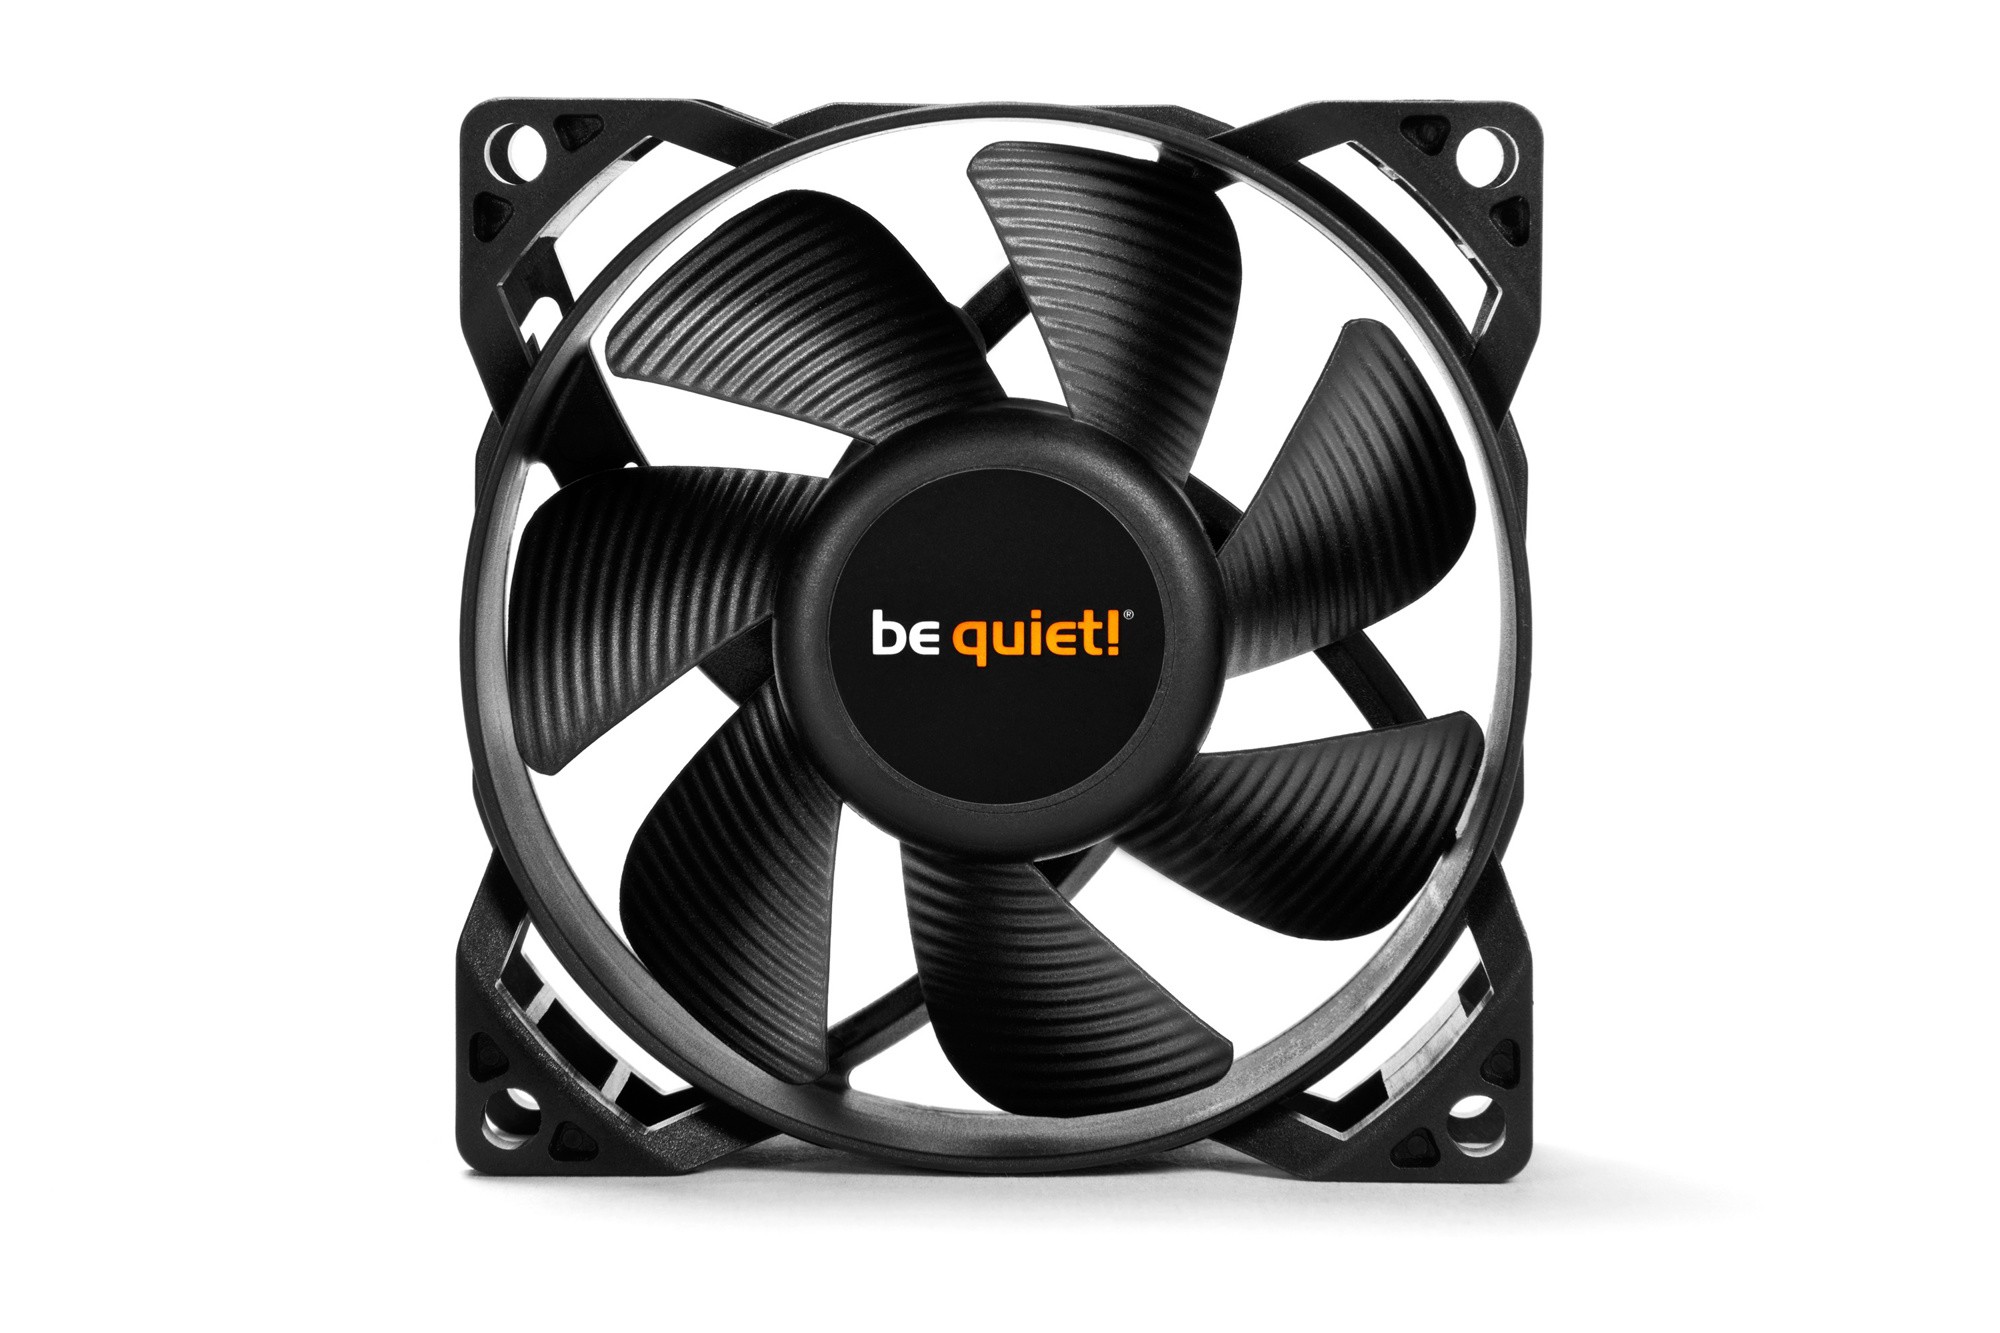  be quiet! Pure Wings 2 80mm PWM (BL037) (80, 1900rpm, 26.3CFM, 19.2dB, 4-pin, Rifle)